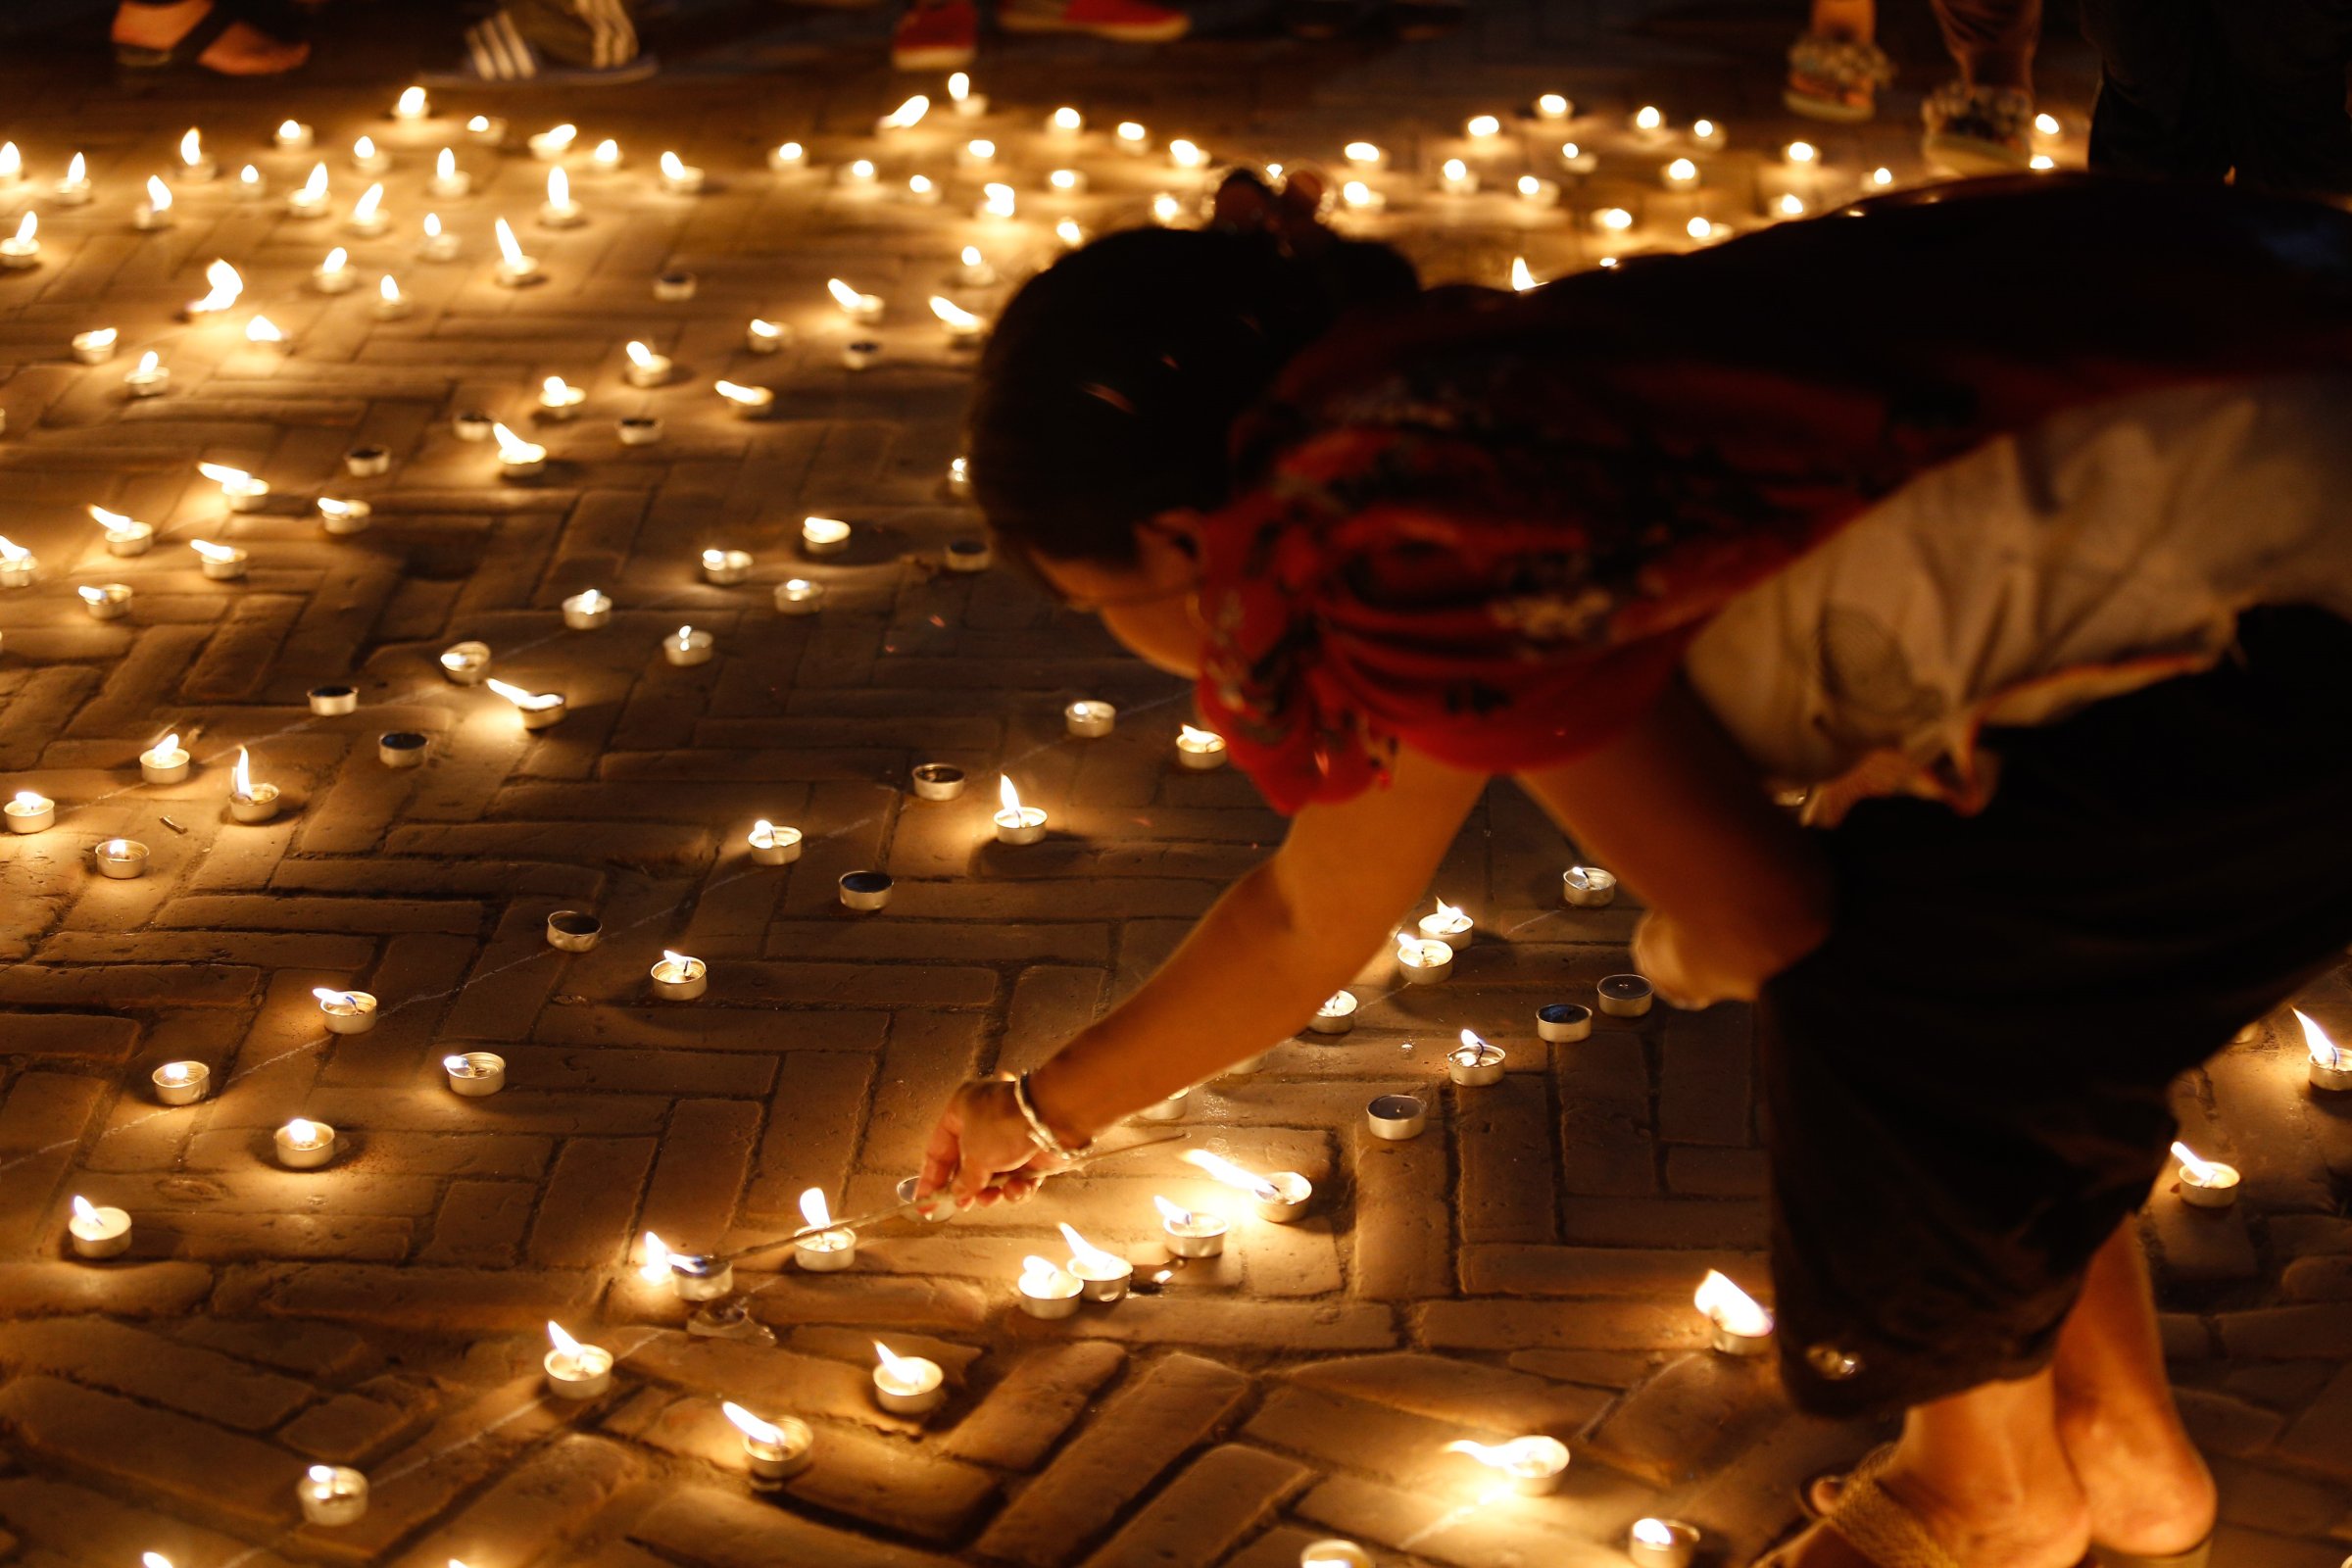 Nepalese people pay homage to Earthquake victims